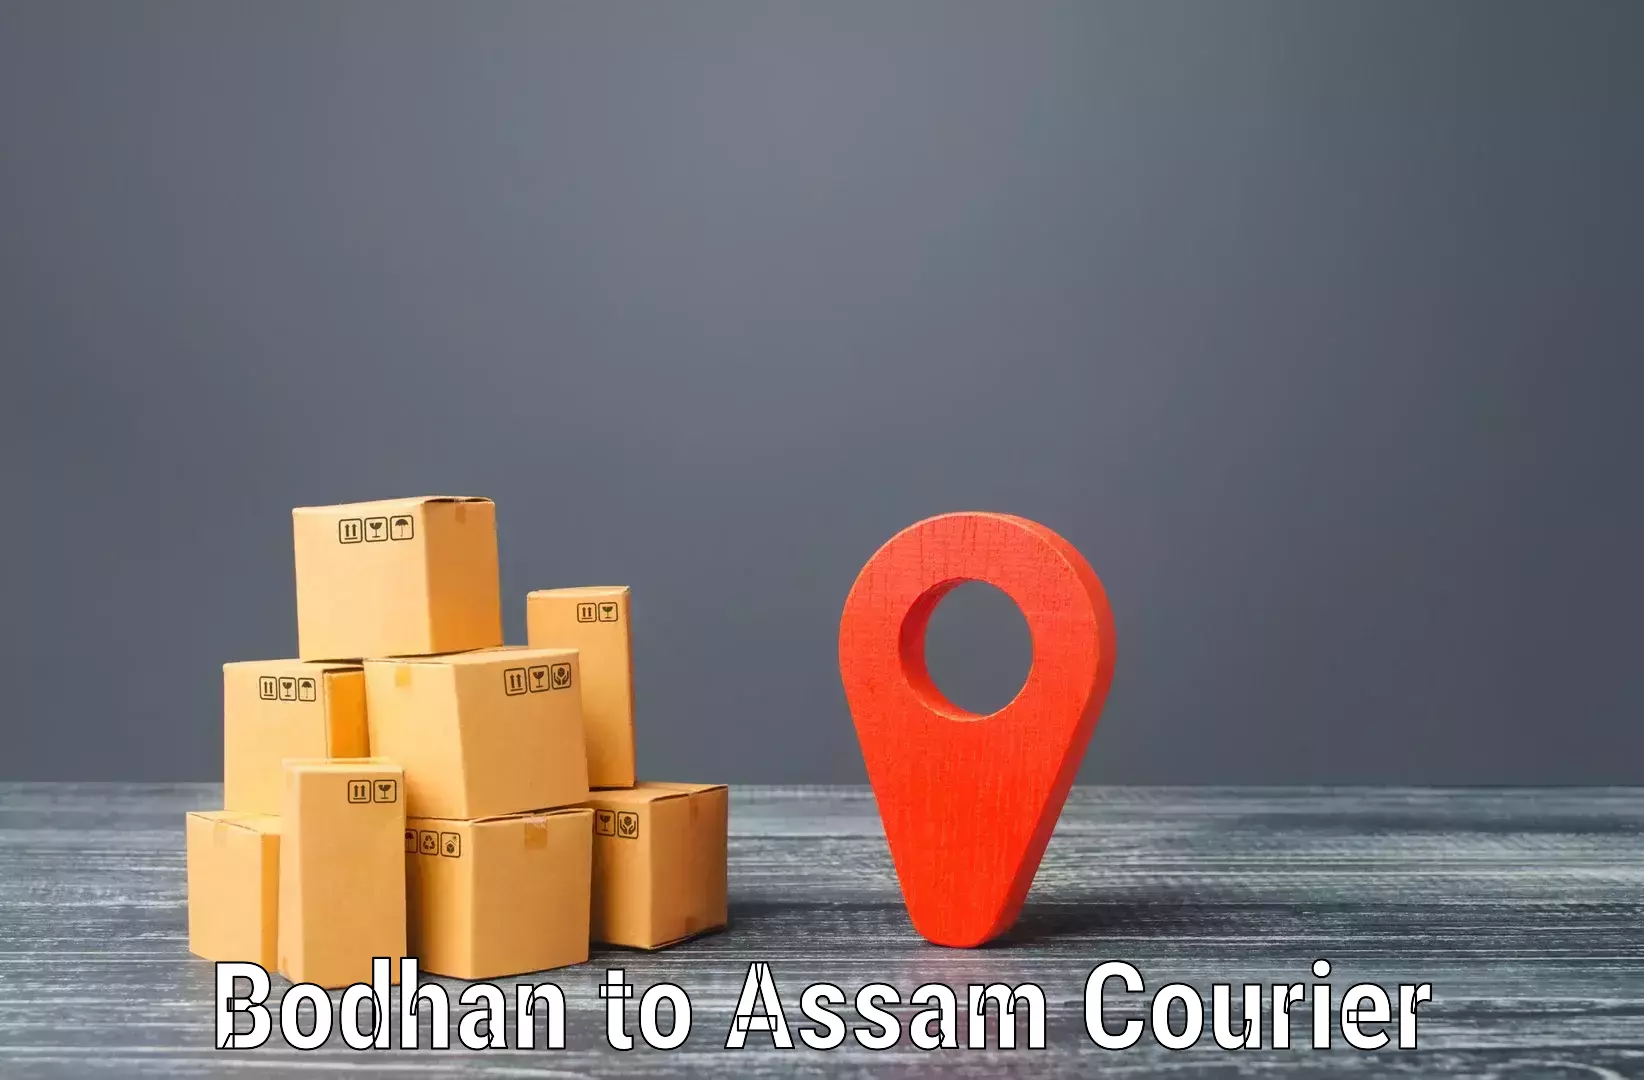 Air courier services in Bodhan to Silchar